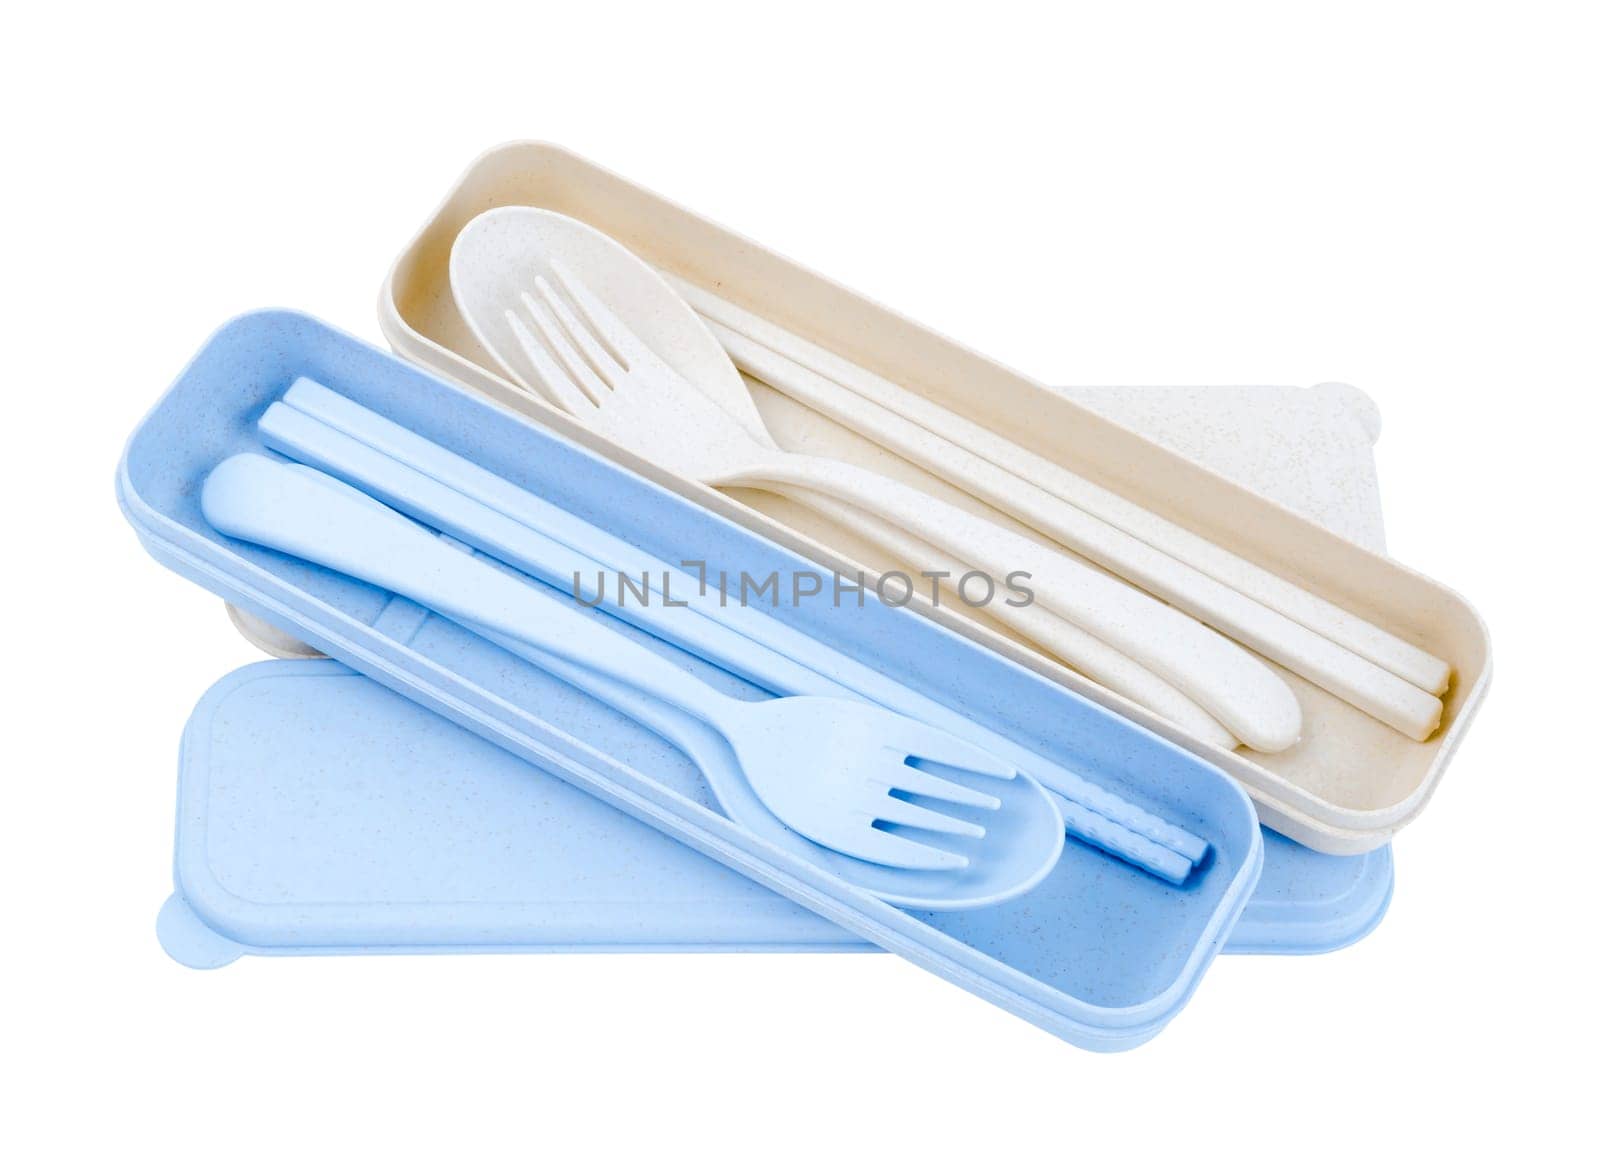 The Plastic spoons, forks and chopsticks set isolated on white background. Saved clipping path. by Gamjai